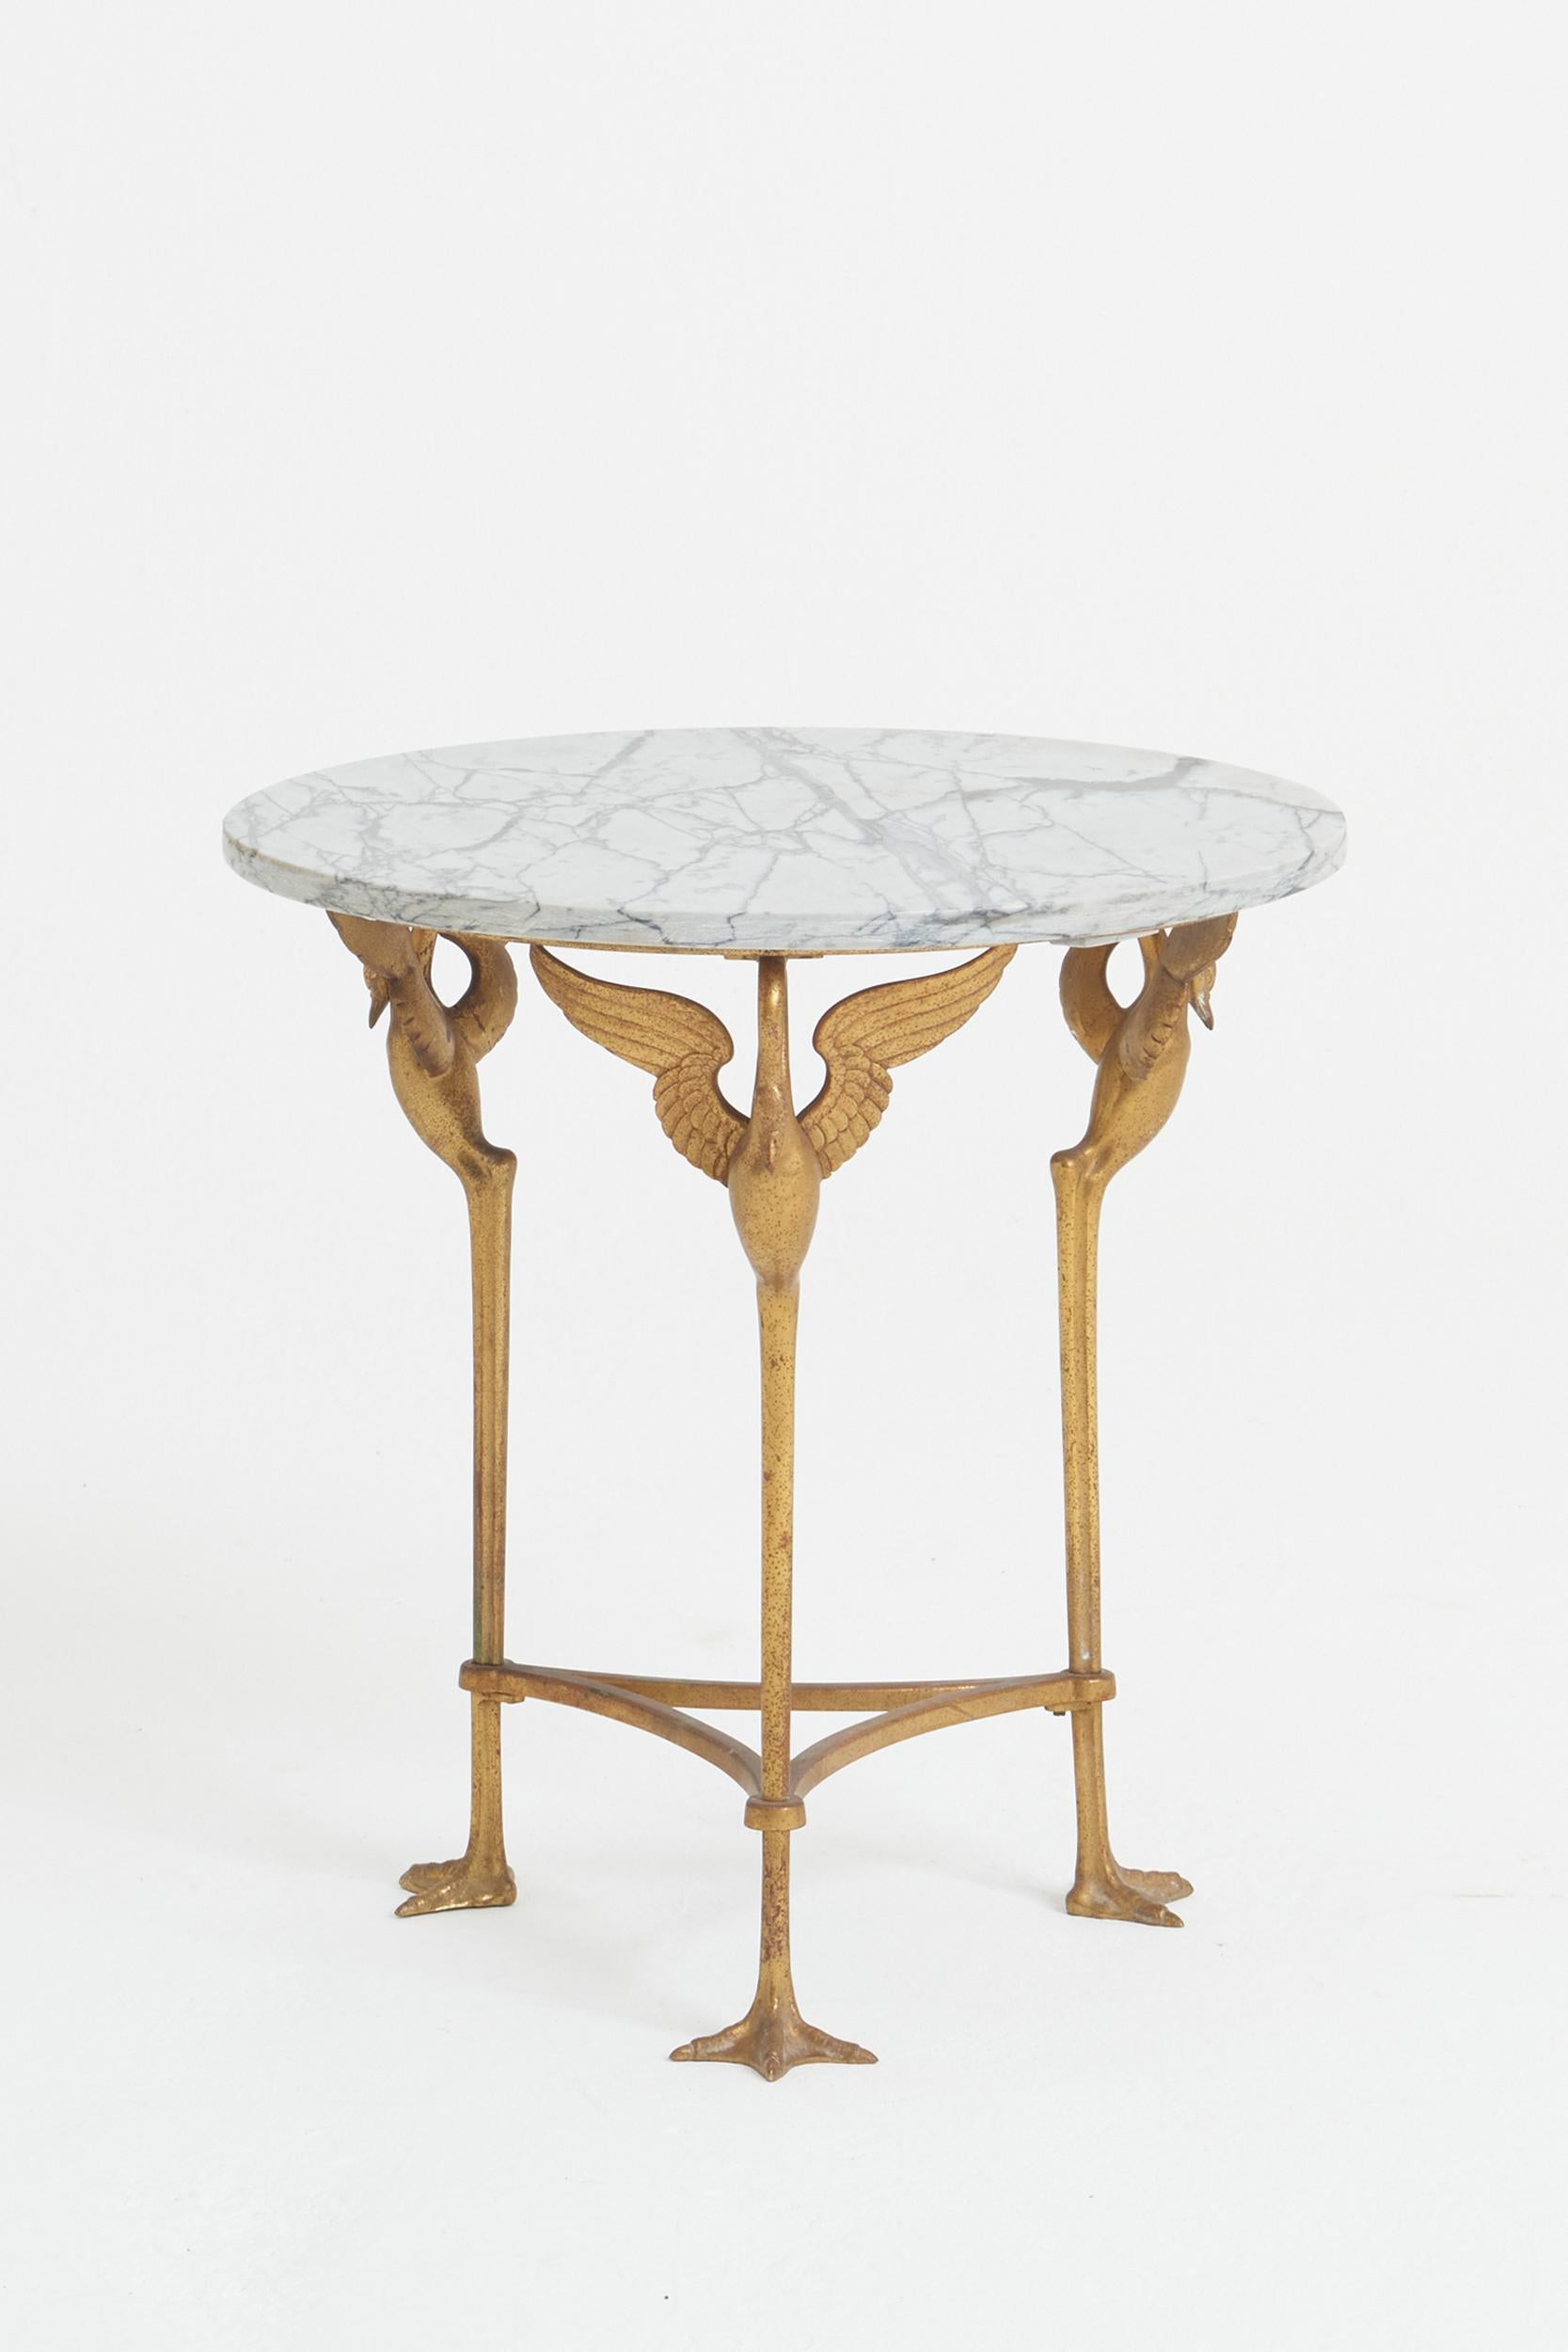 An Empire style gilt bronze and marble top side table.
France, Circa 1880-1900
45.5 cm high by 43 cm diameter